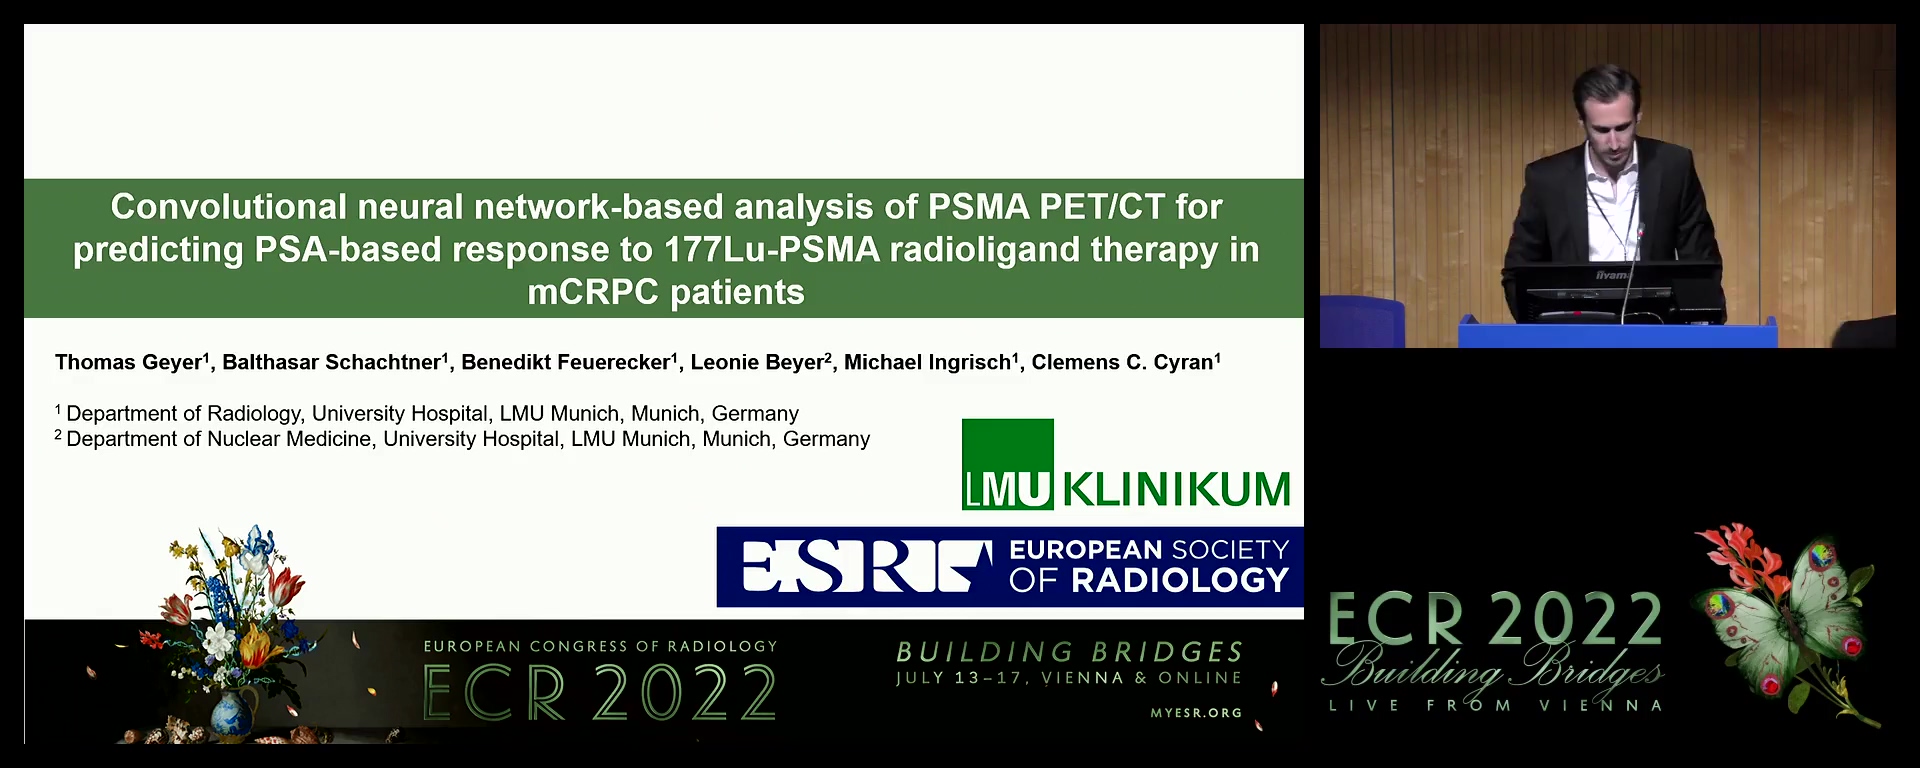 Convolutional neural network-based analysis of PSMA PET/CT for predicting PSA-based response to 177Lu-PSMA radioligand therapy in mCRPC patients - Thomas Geyer, Munich / DE